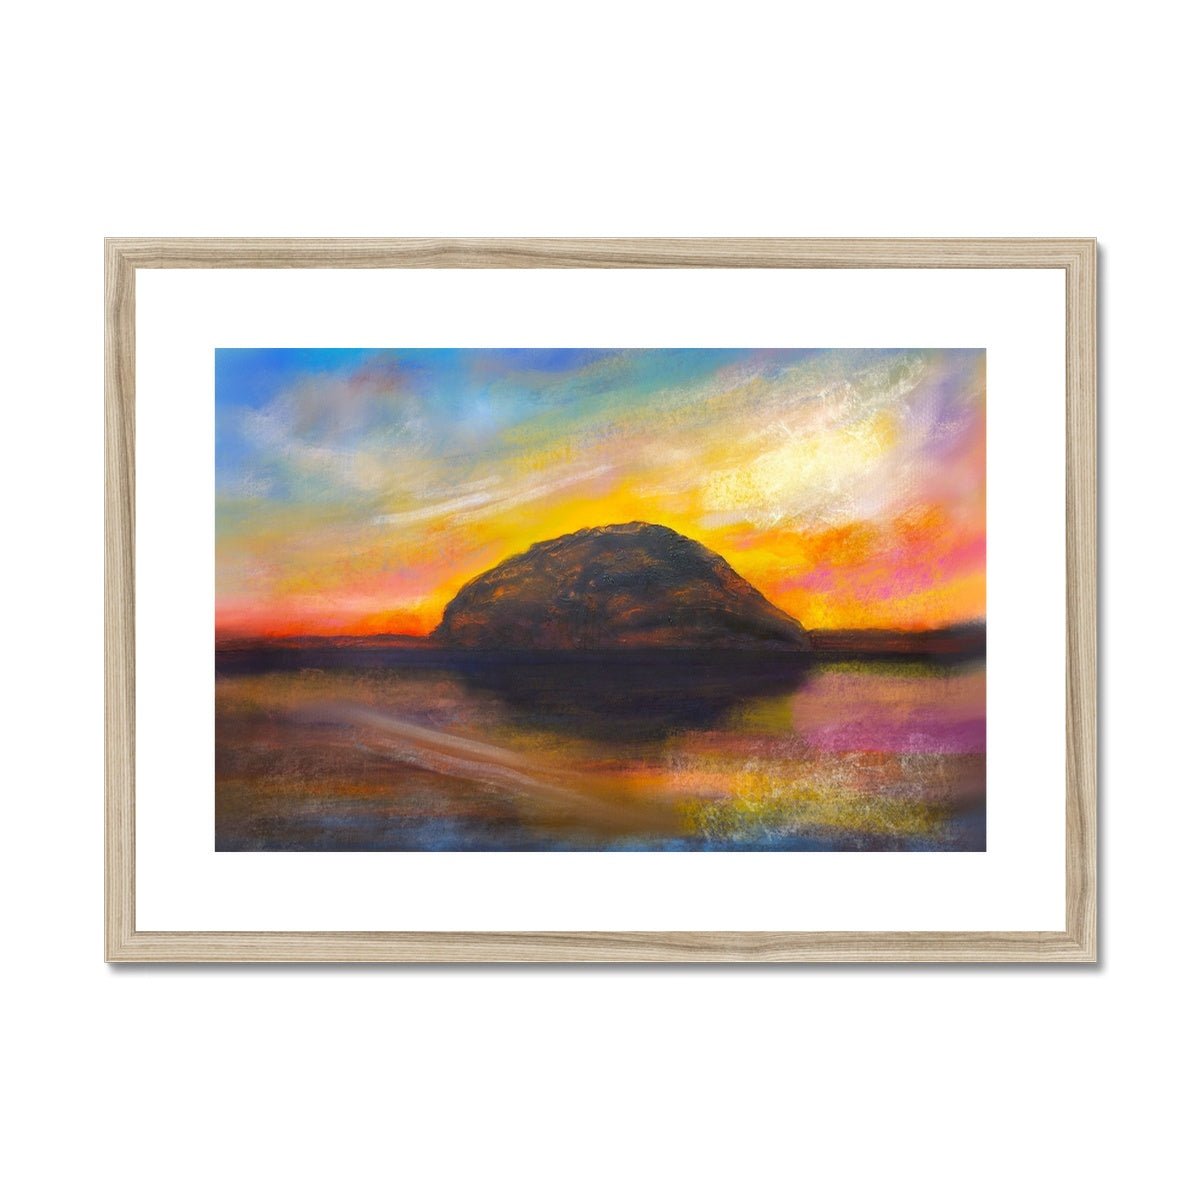 Ailsa Craig Dusk Painting | Framed & Mounted Prints From Scotland-Framed & Mounted Prints-Arran Art Gallery-A2 Landscape-Natural Frame-Paintings, Prints, Homeware, Art Gifts From Scotland By Scottish Artist Kevin Hunter